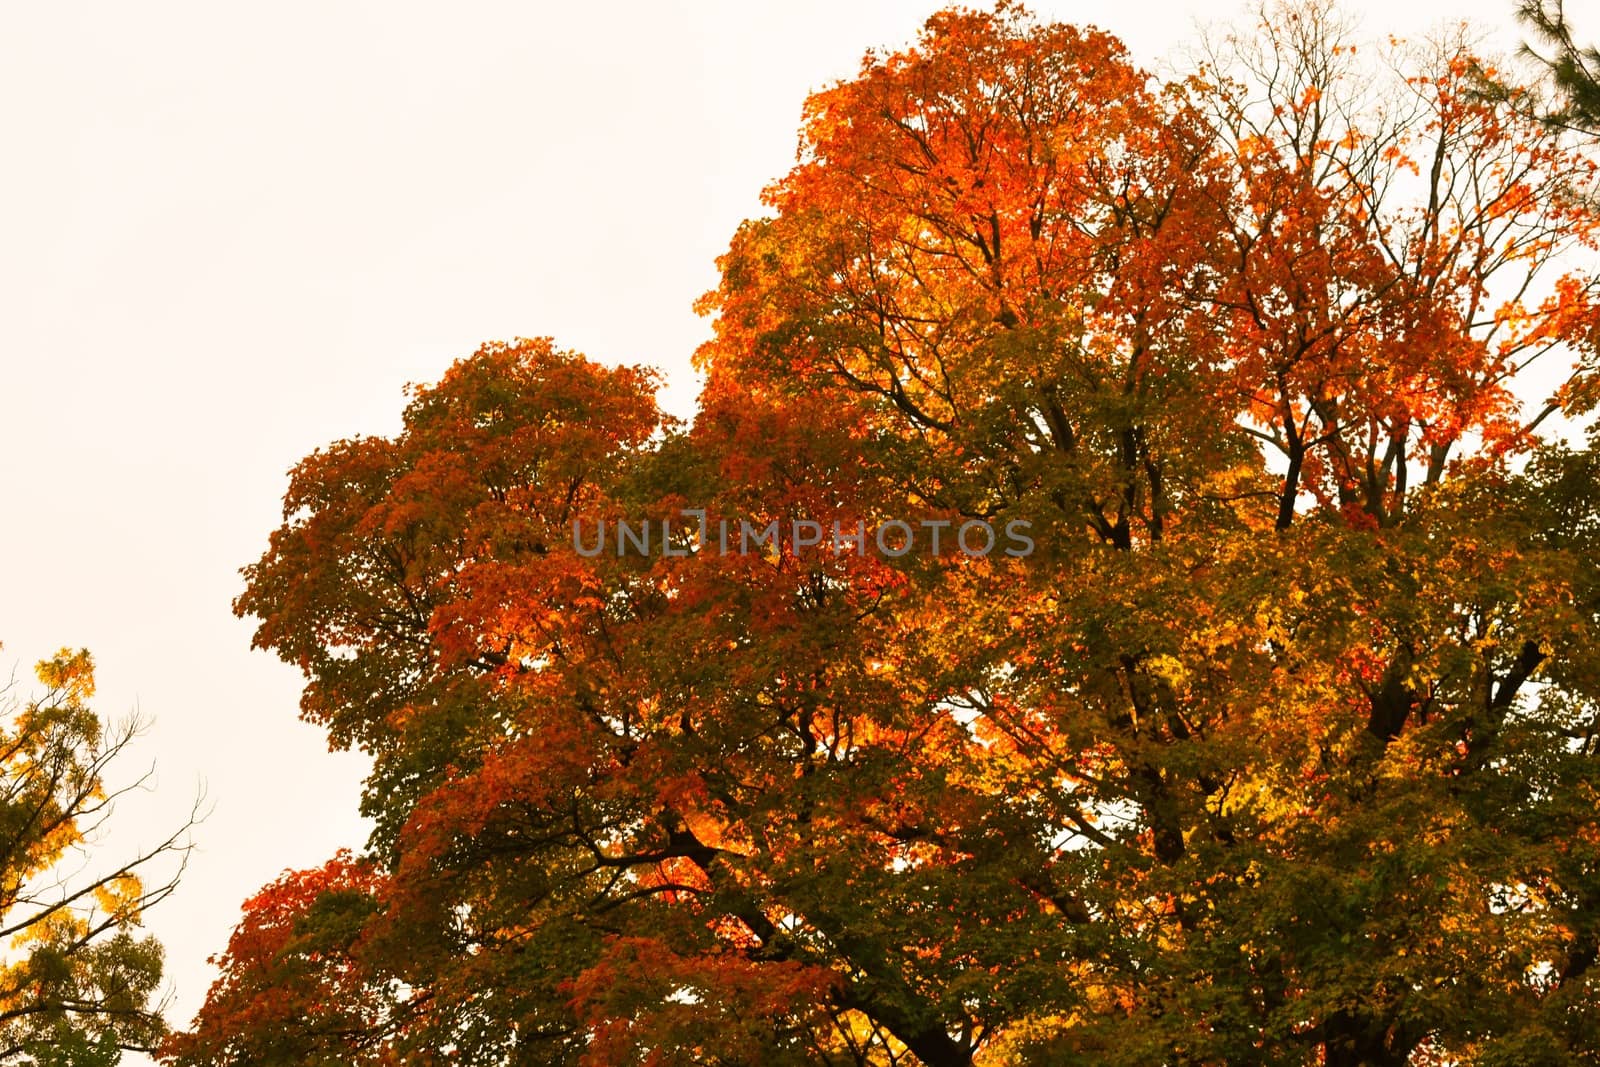 A Large Autumn Tree Lit By the Sunset by bju12290